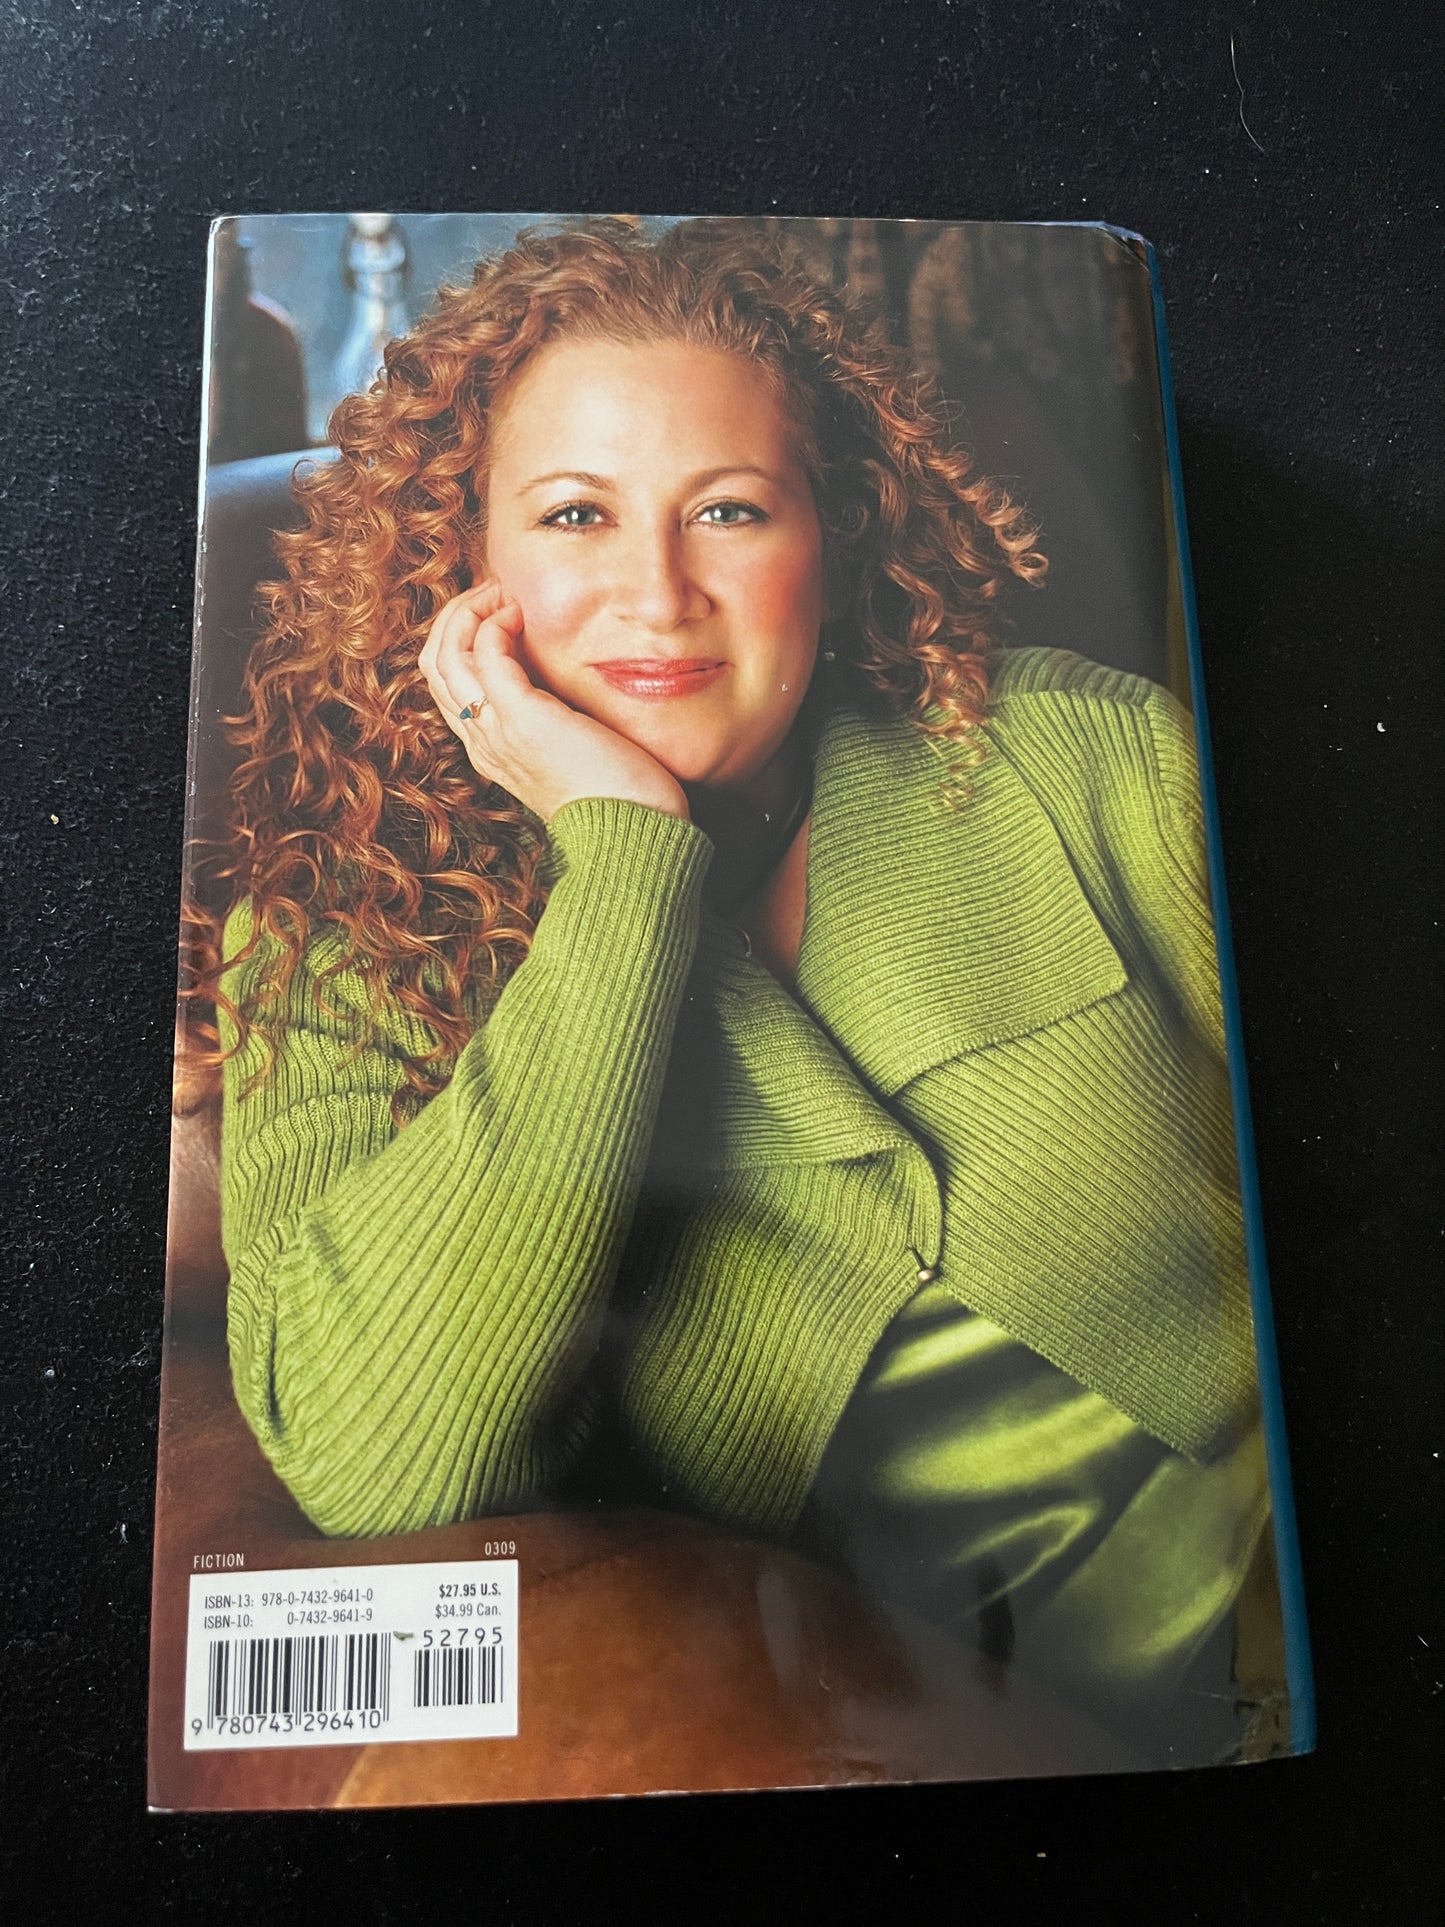 HANDLE WITH CARE by Jodi Picoult